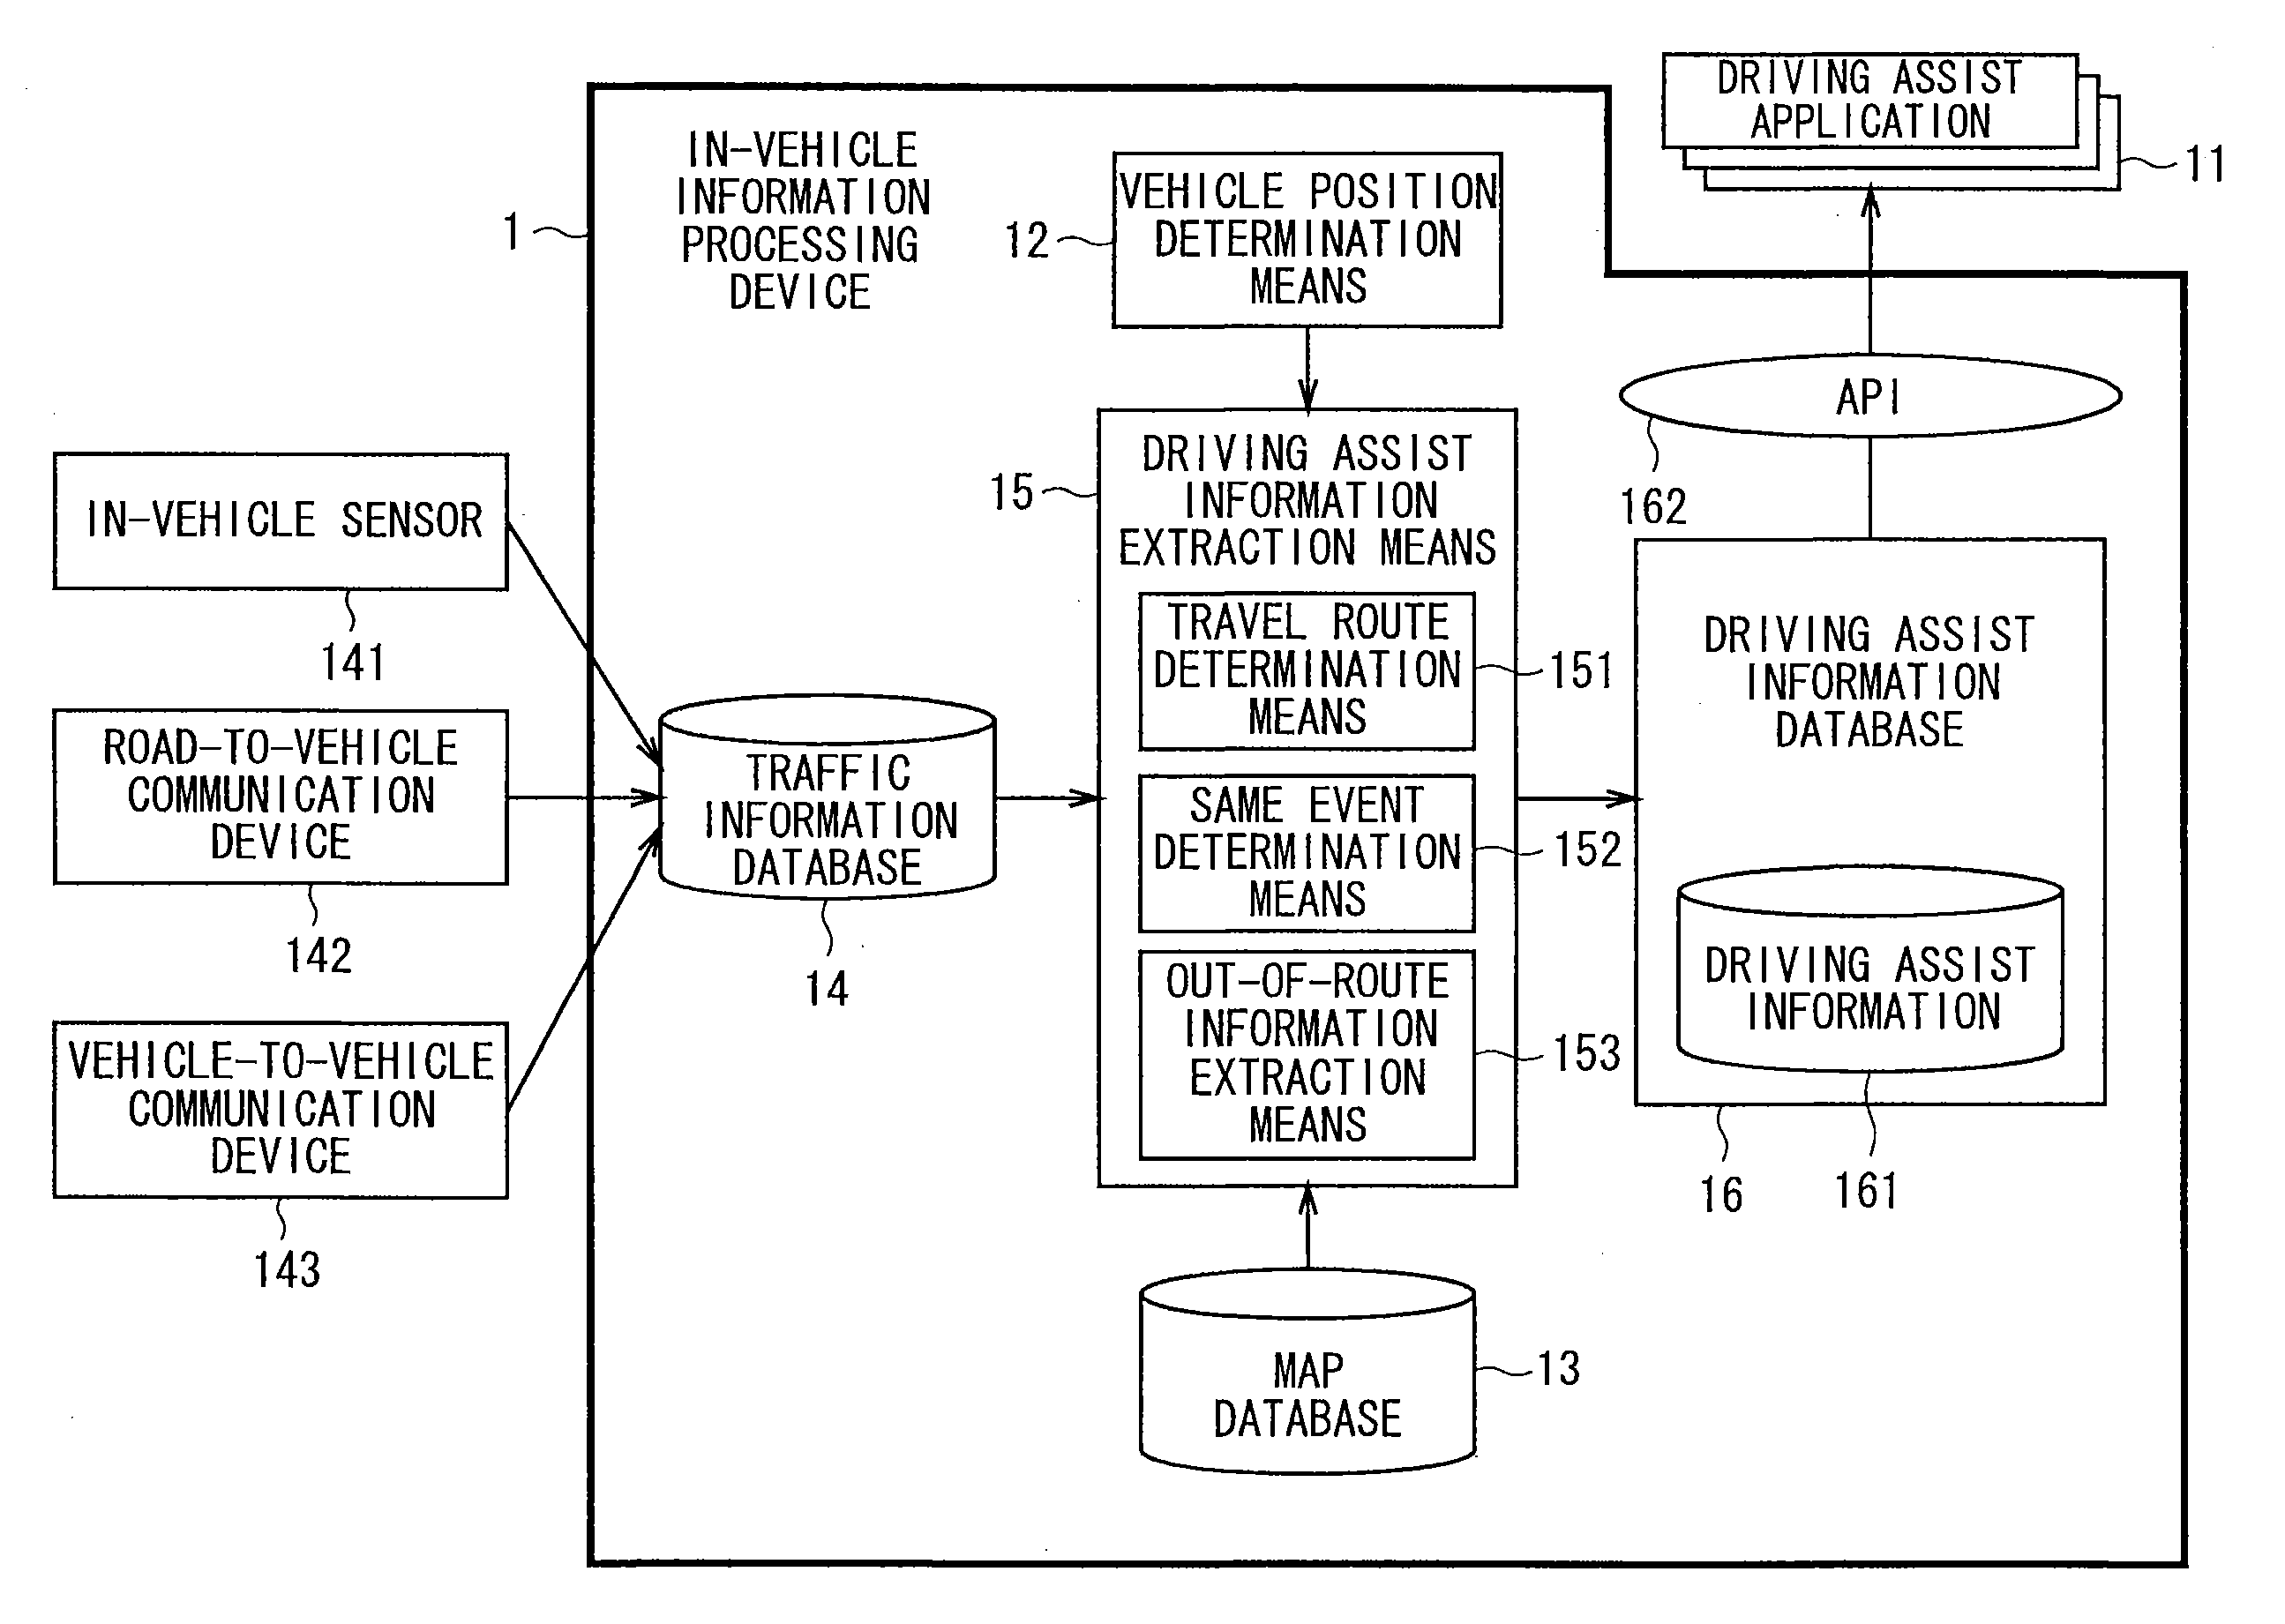 In-vehicle information processing device and driving assist device